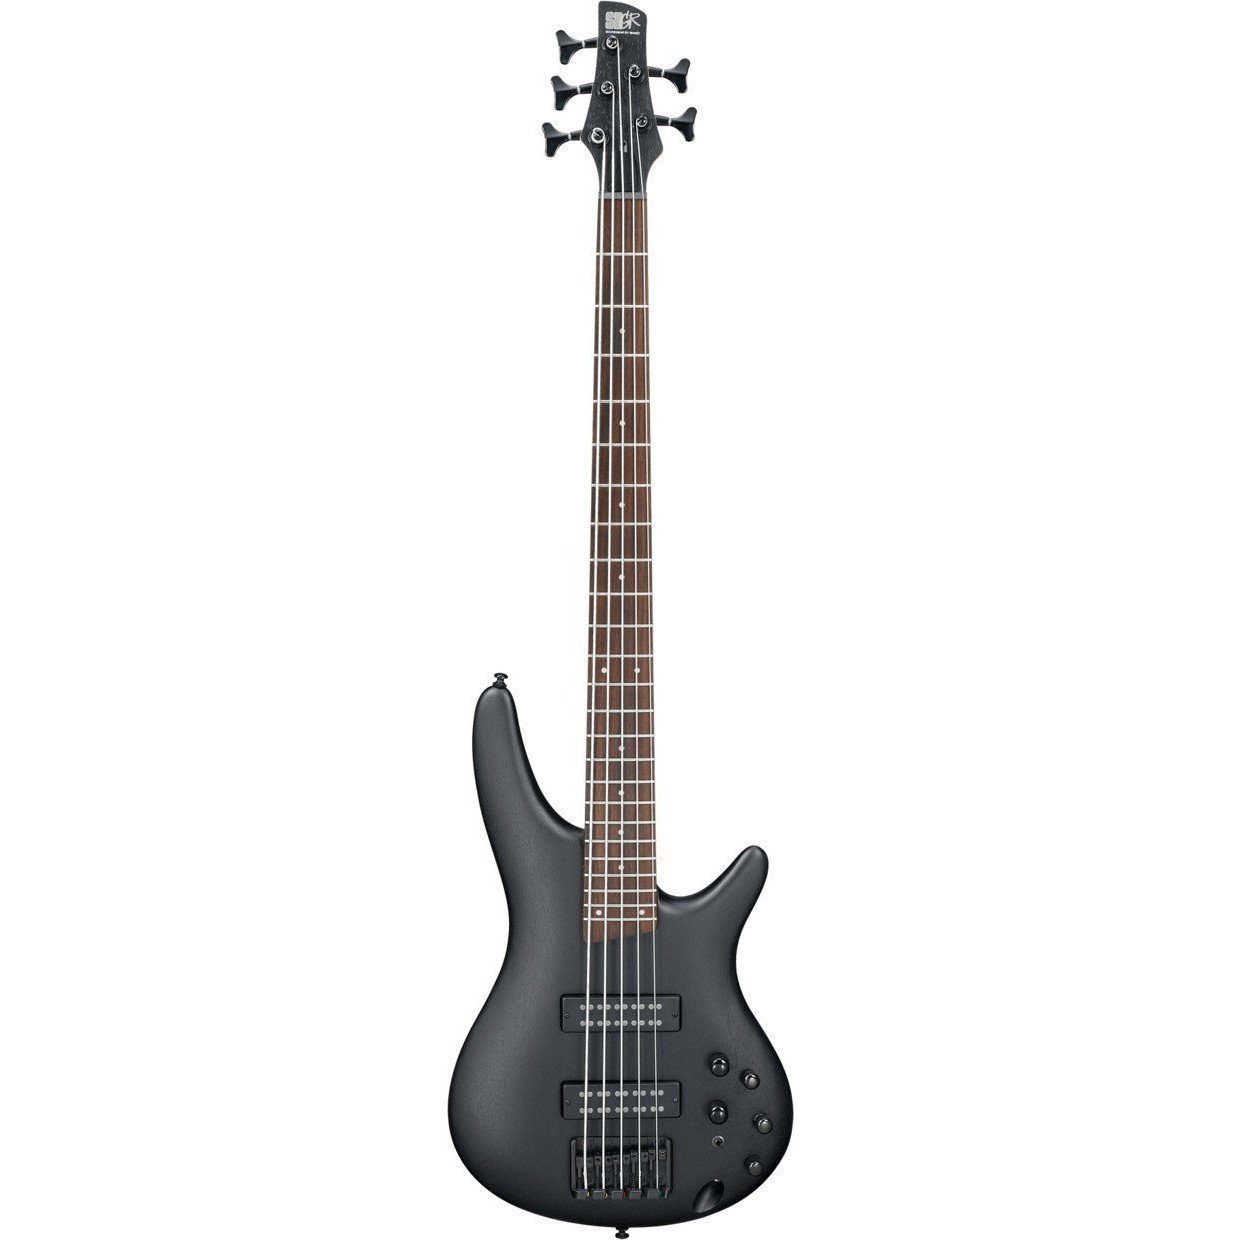 An image of Ibanez SR305EB 5 String Bass in Weathered Black | PMT Online